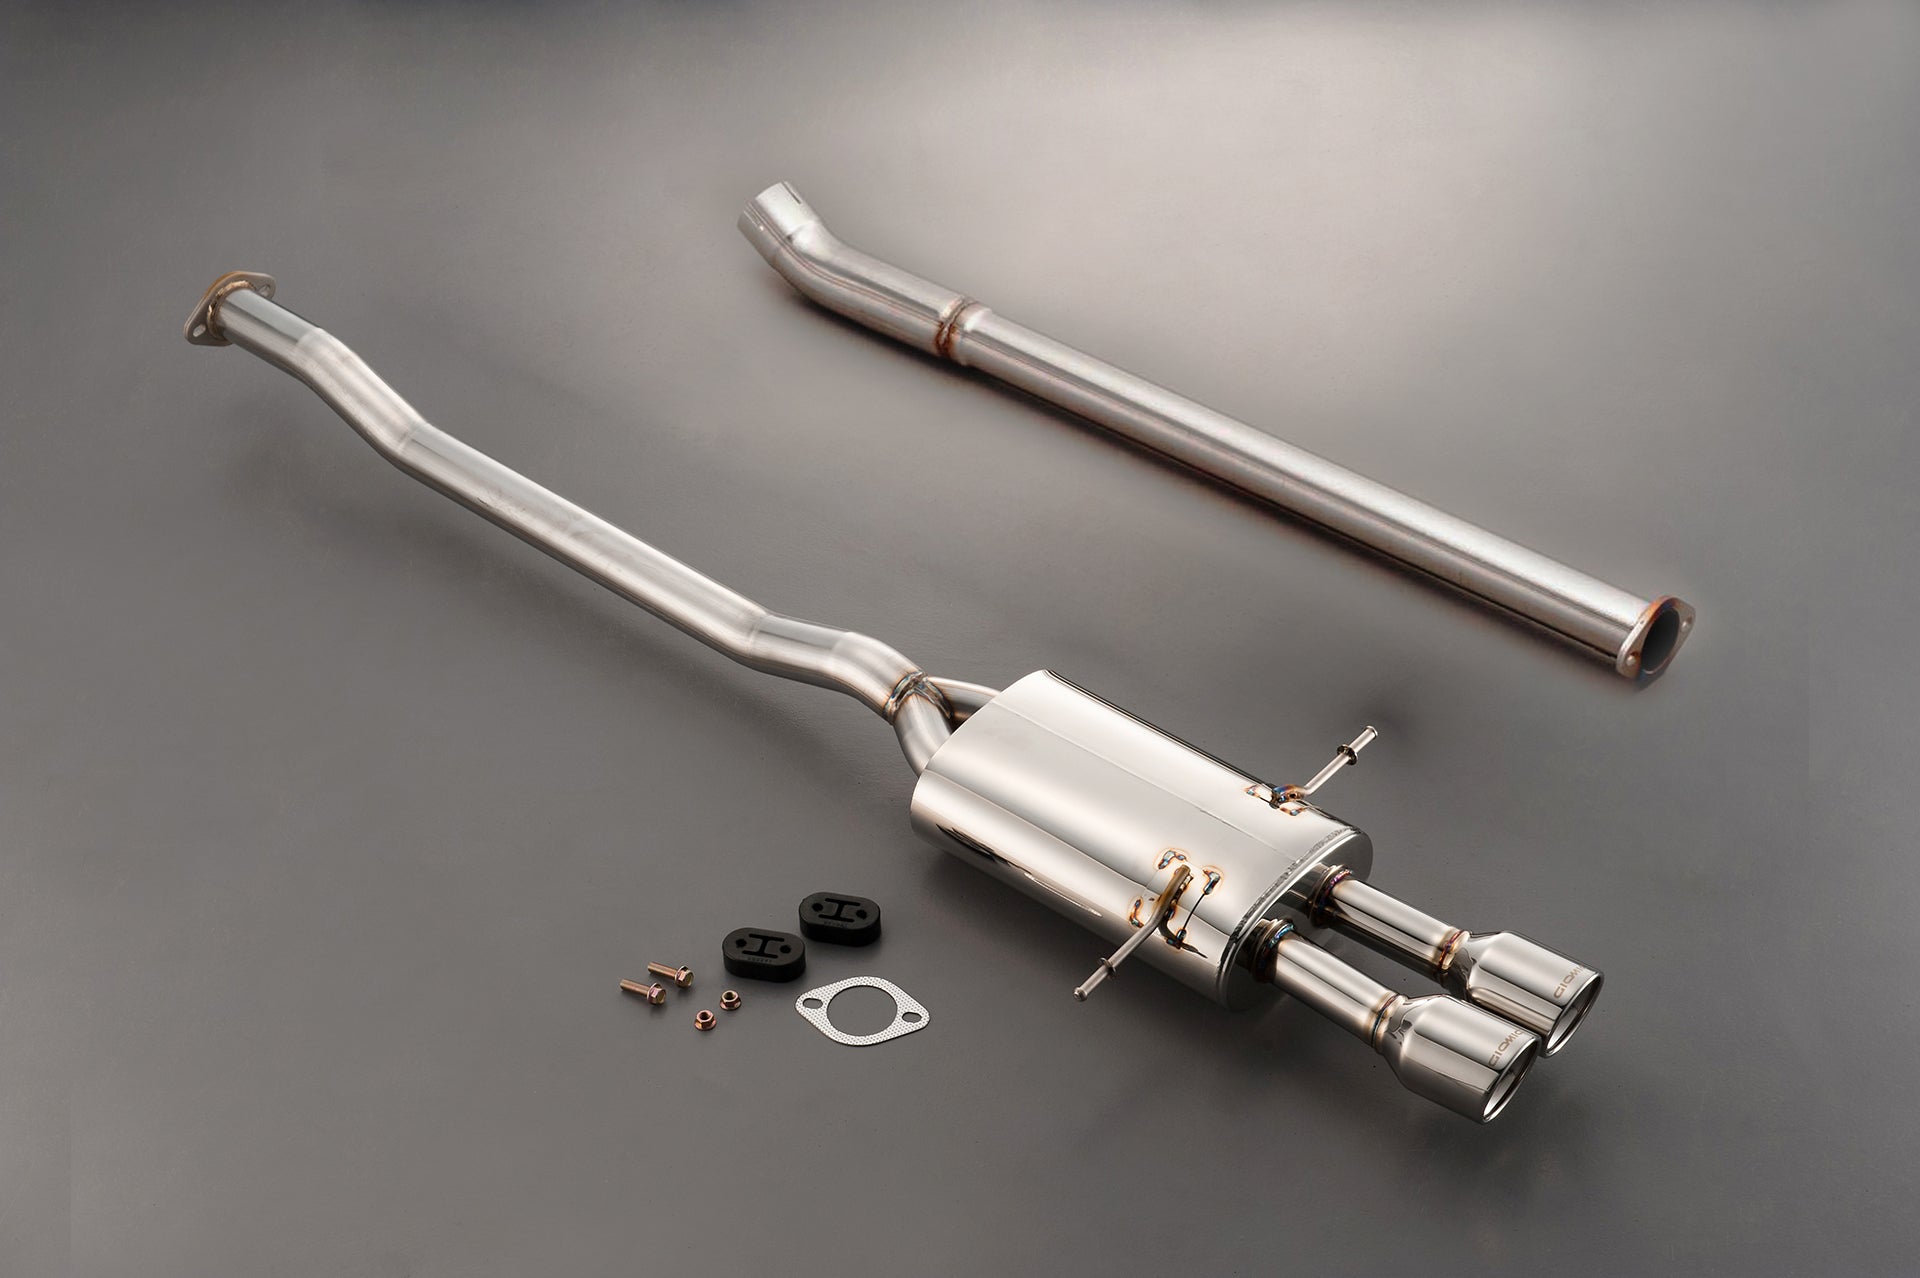 Stainless Exhaust Silencer for R56CPS